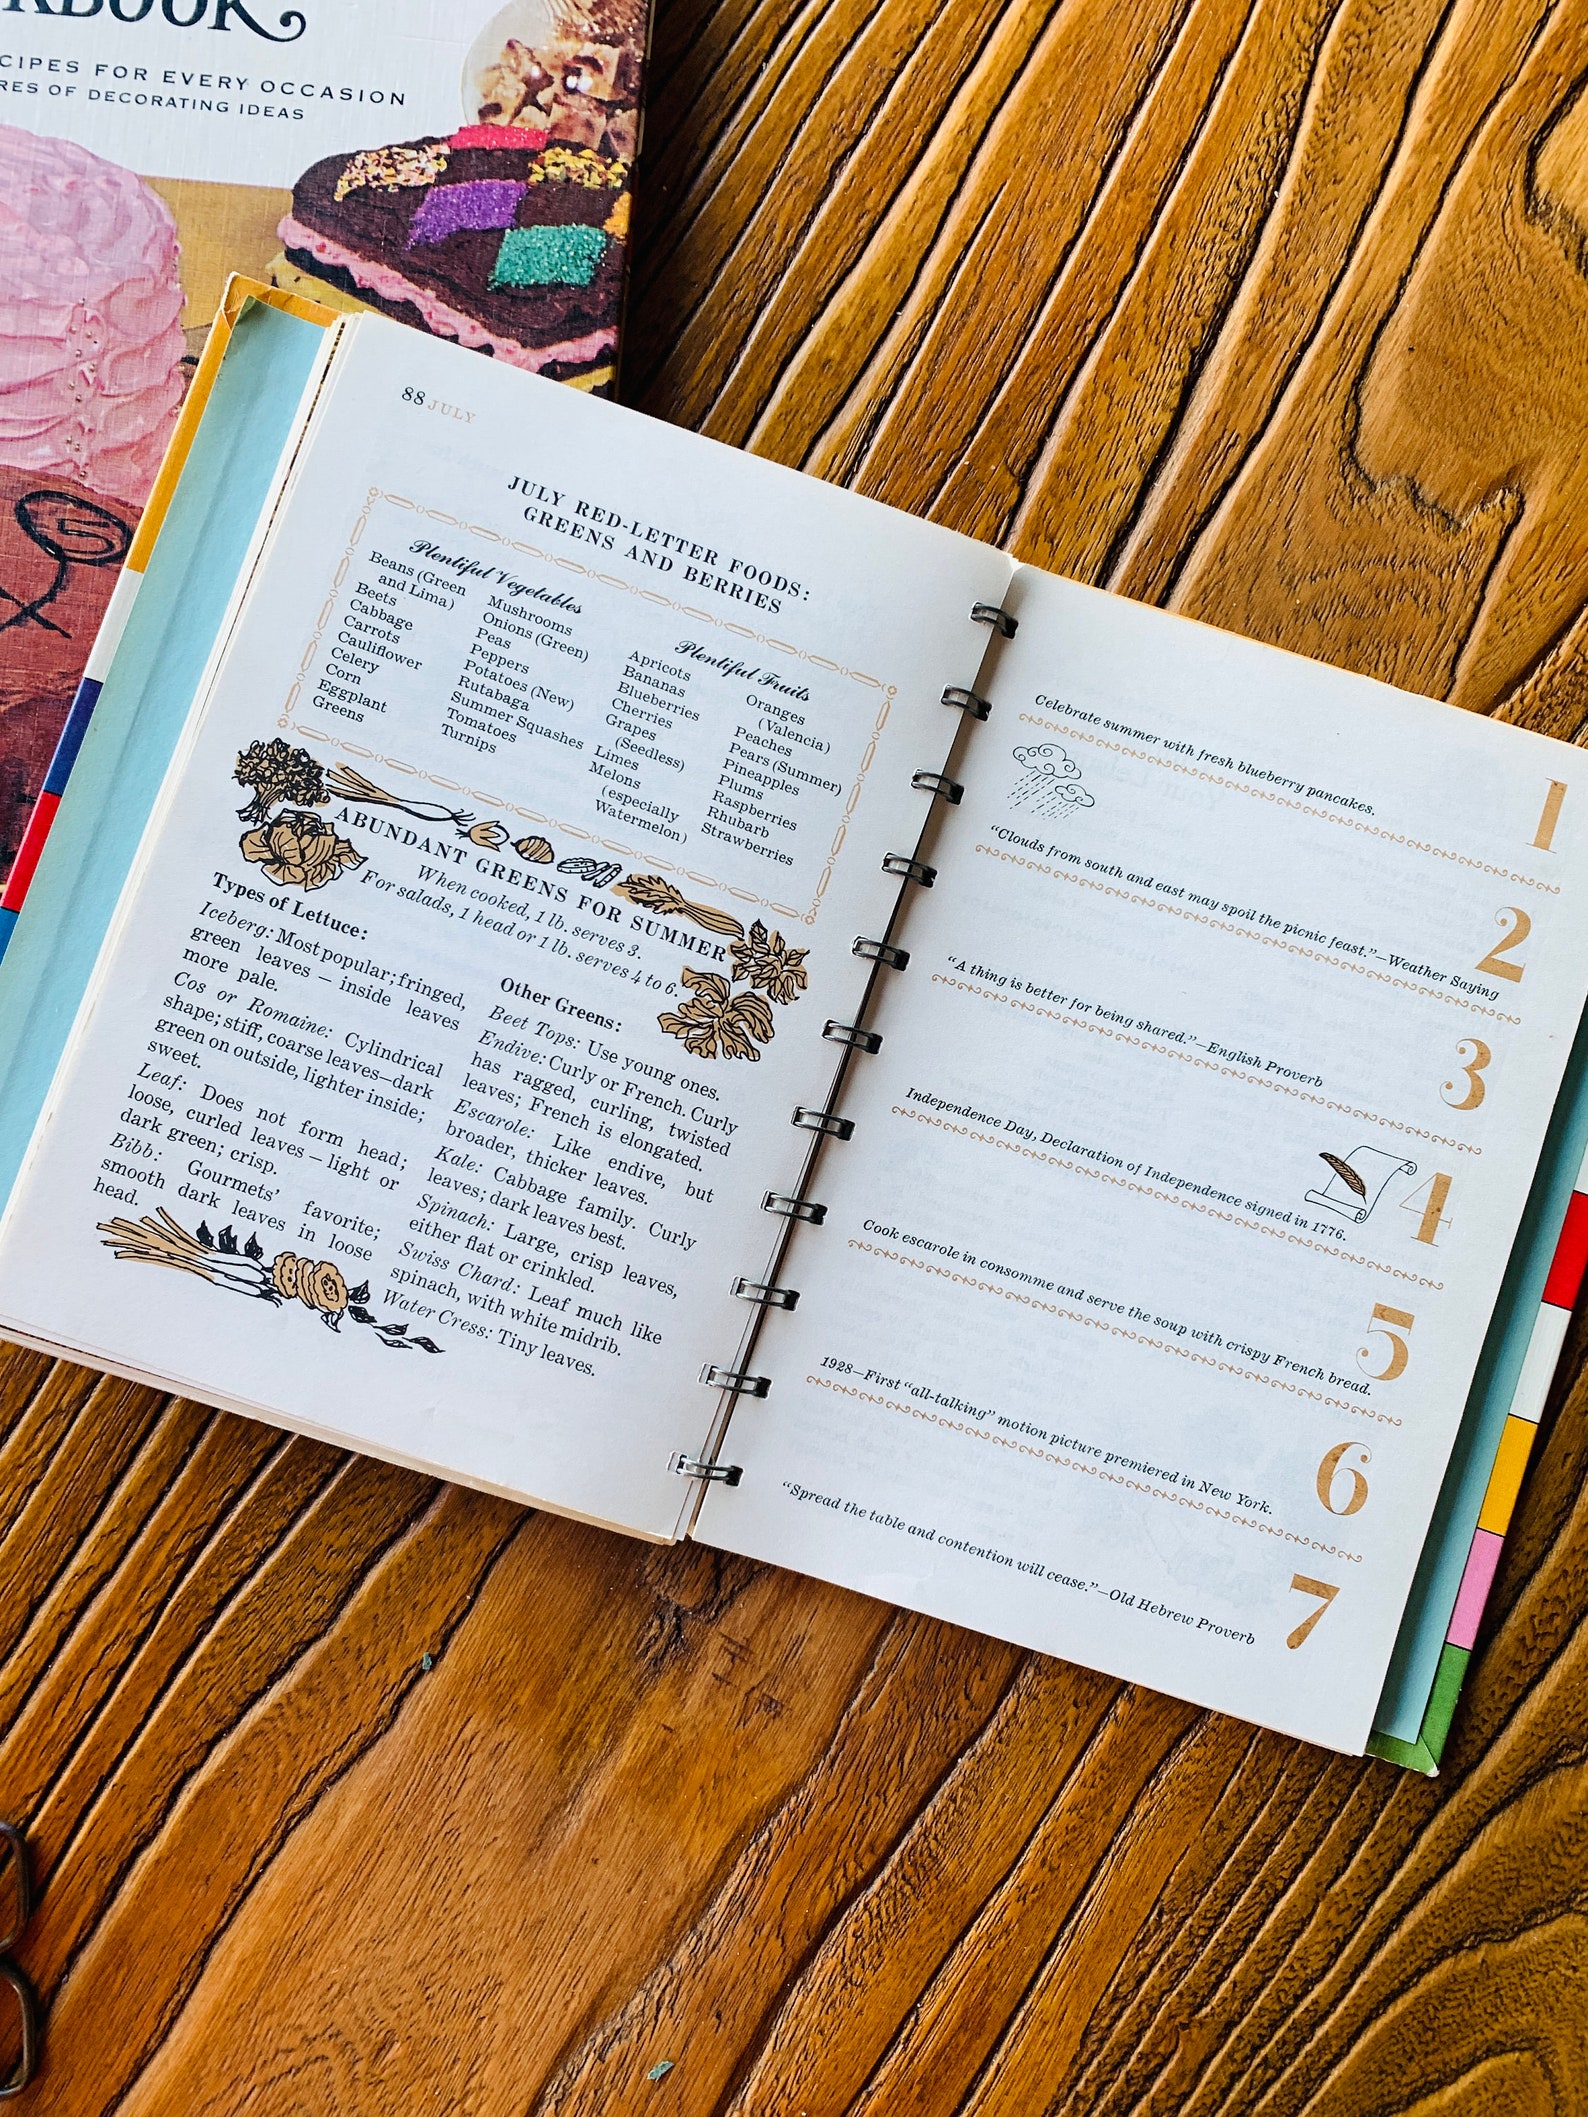 Betty Crocker's Cooking Calendar Guide to Meal Planning Etsy